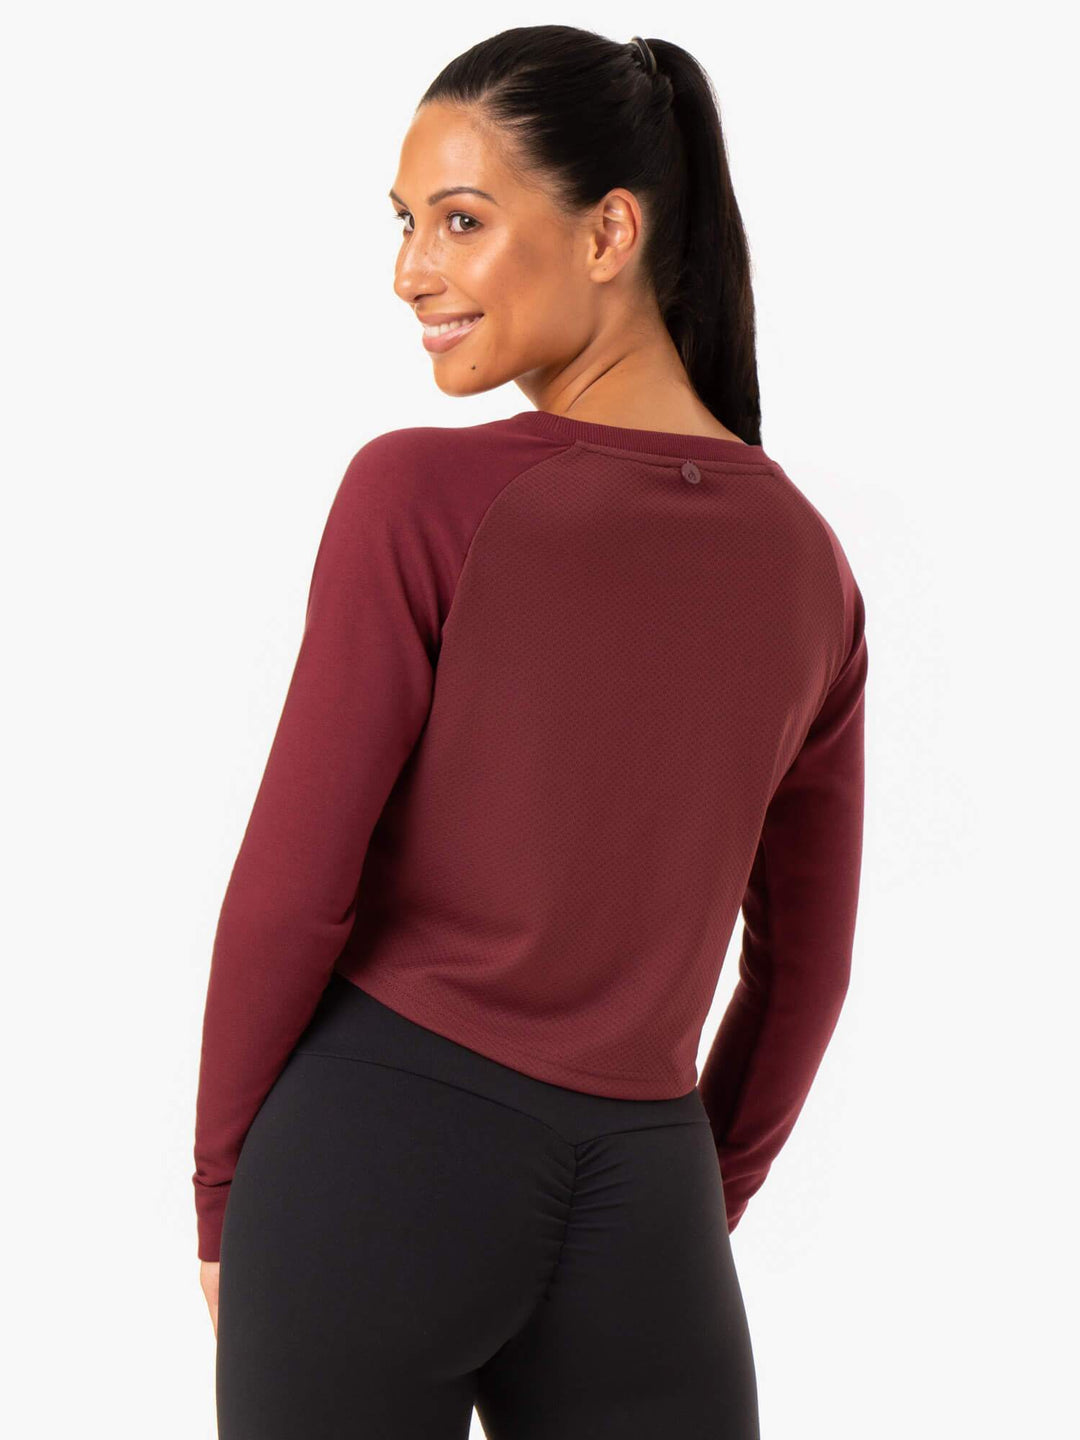 Staples Cropped Sweater - Burgundy Clothing Ryderwear 